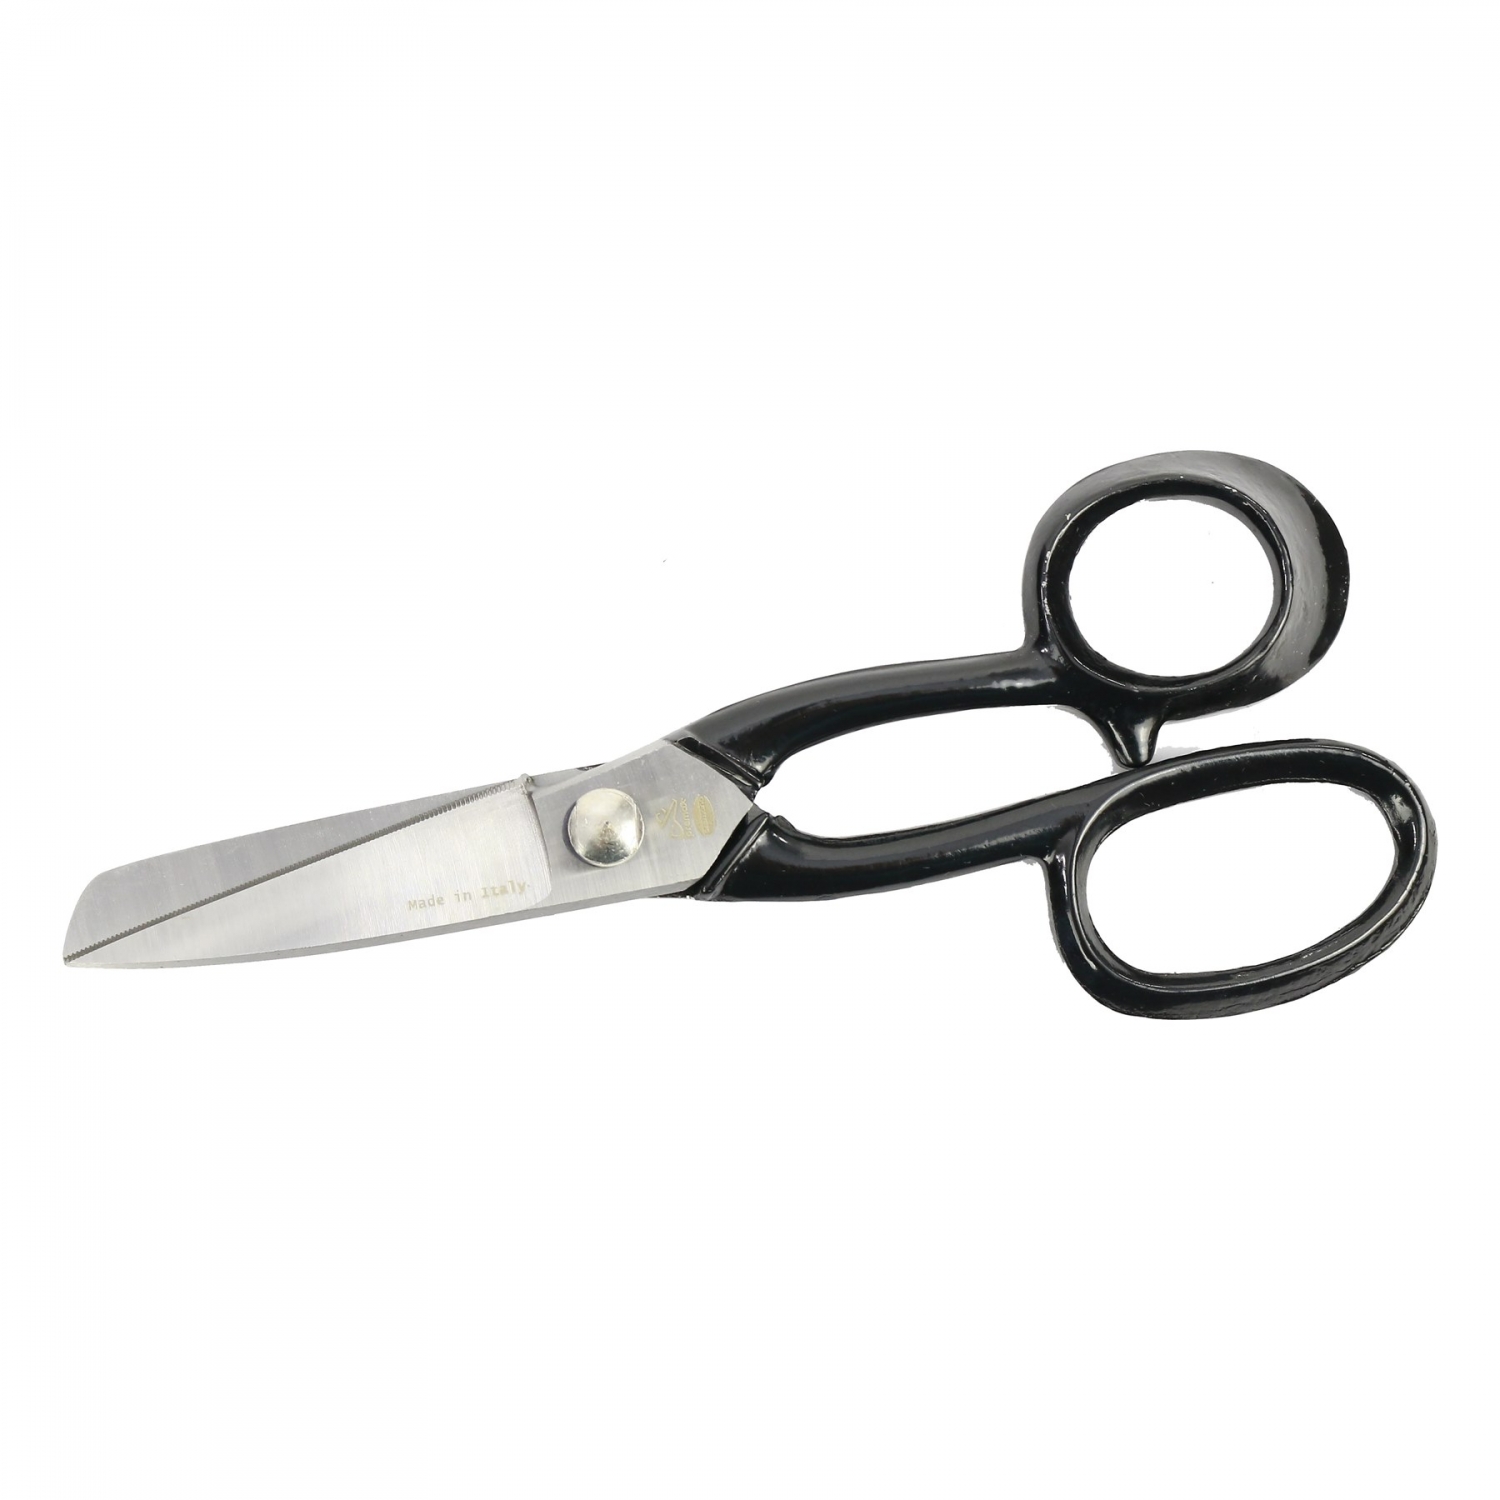 Tailoring Leather Scissors, lenght 21.5 cm, Code: F16350812